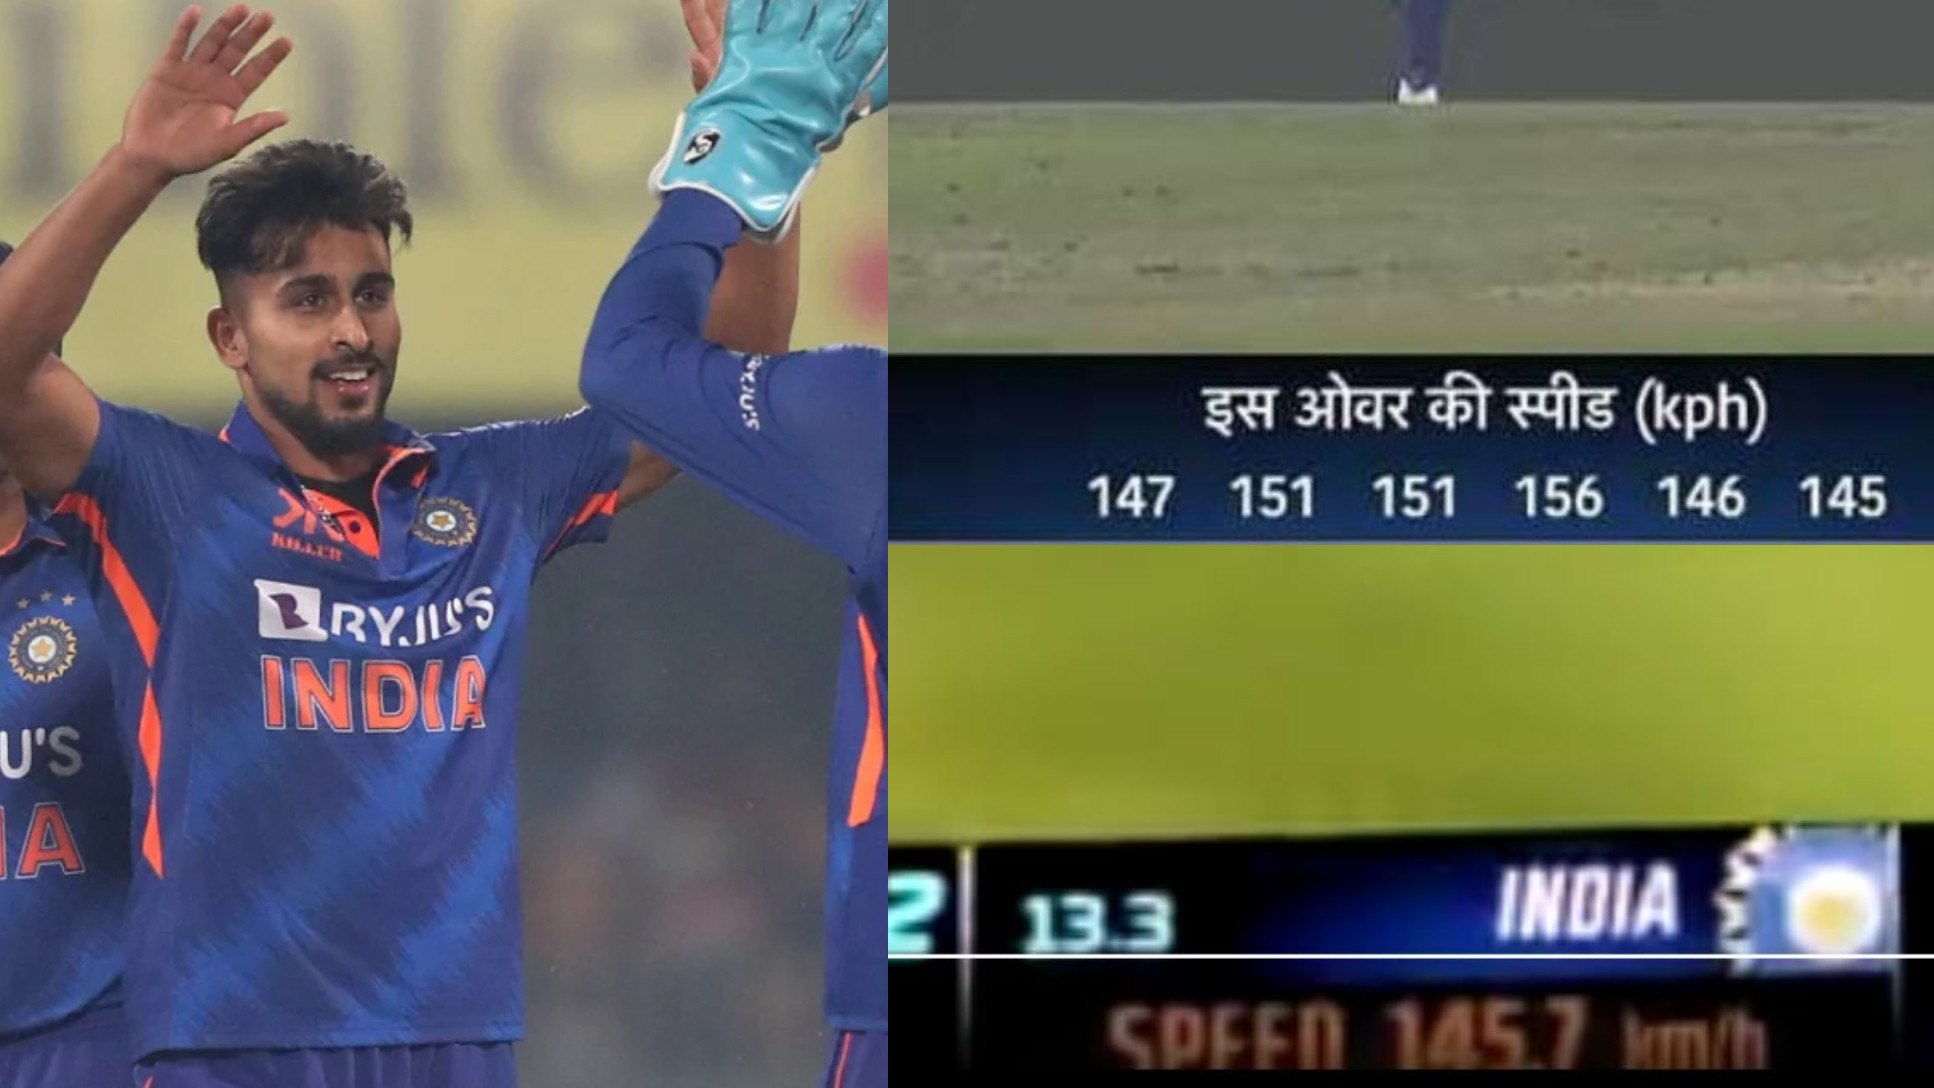 IND v SL 2023: WATCH- Confusion on Umran Malik’s fastest ball as Hindi and English broadcasts show different speeds